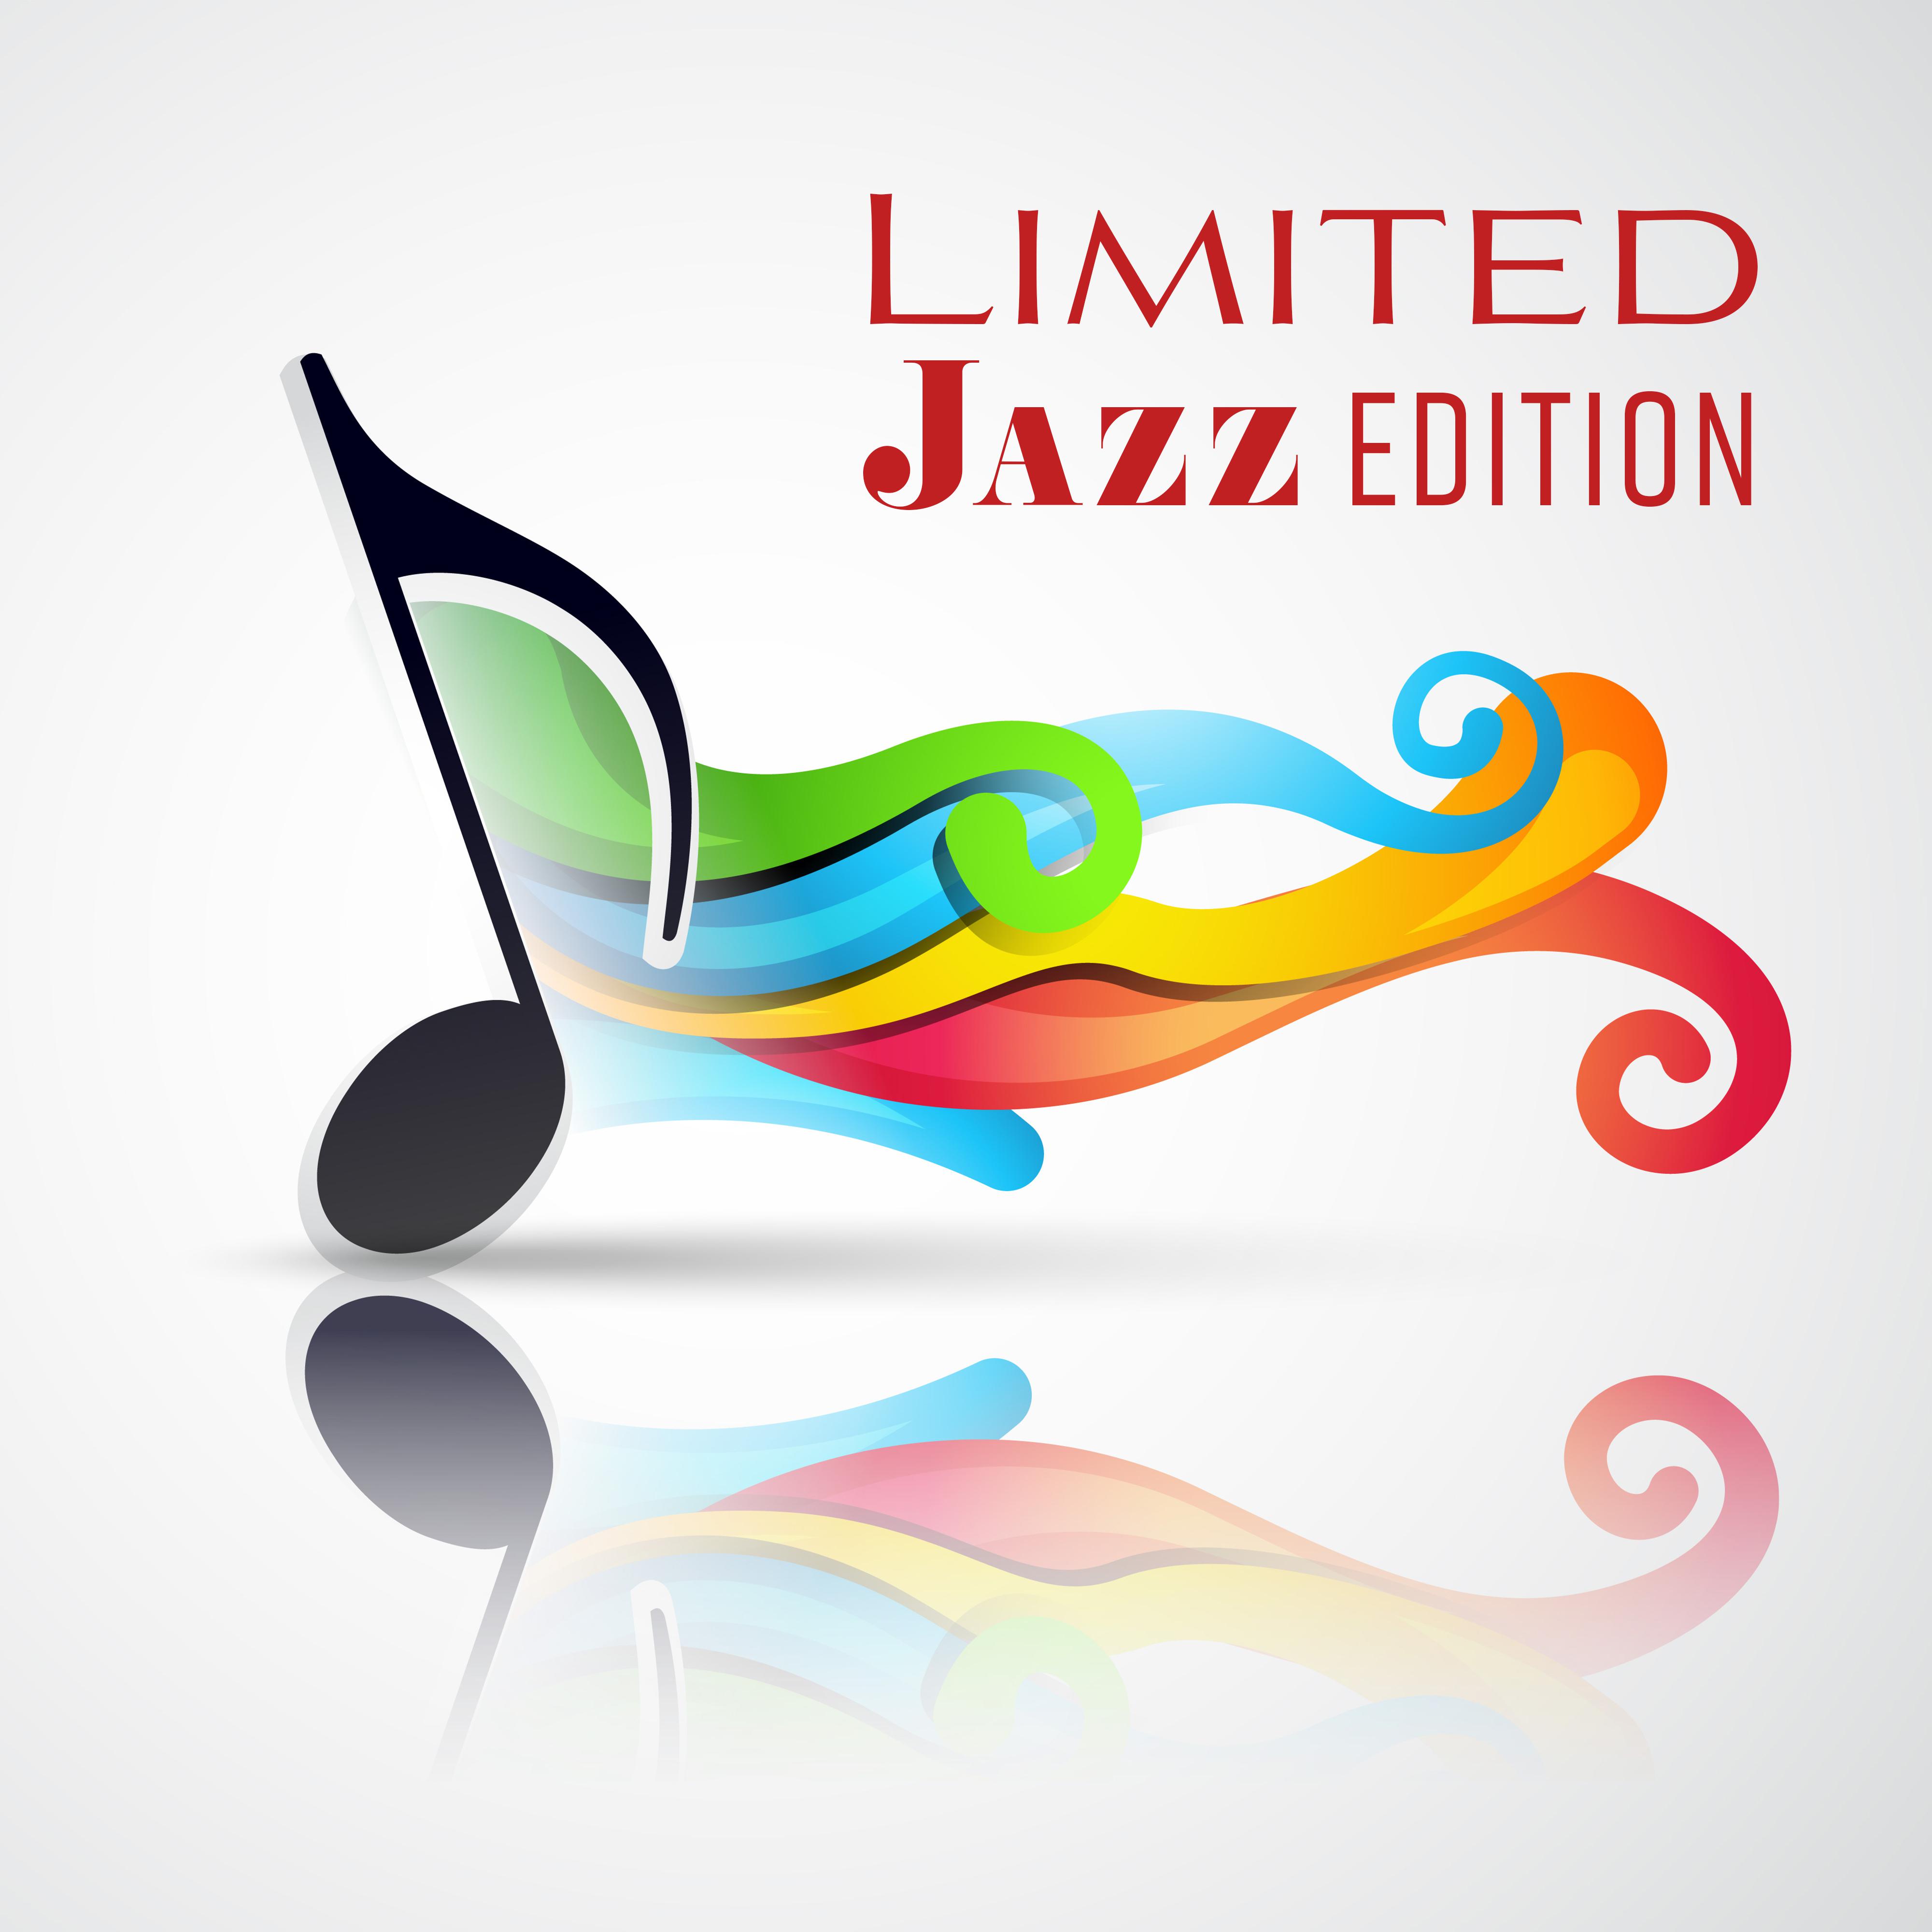 Limited Jazz Edition